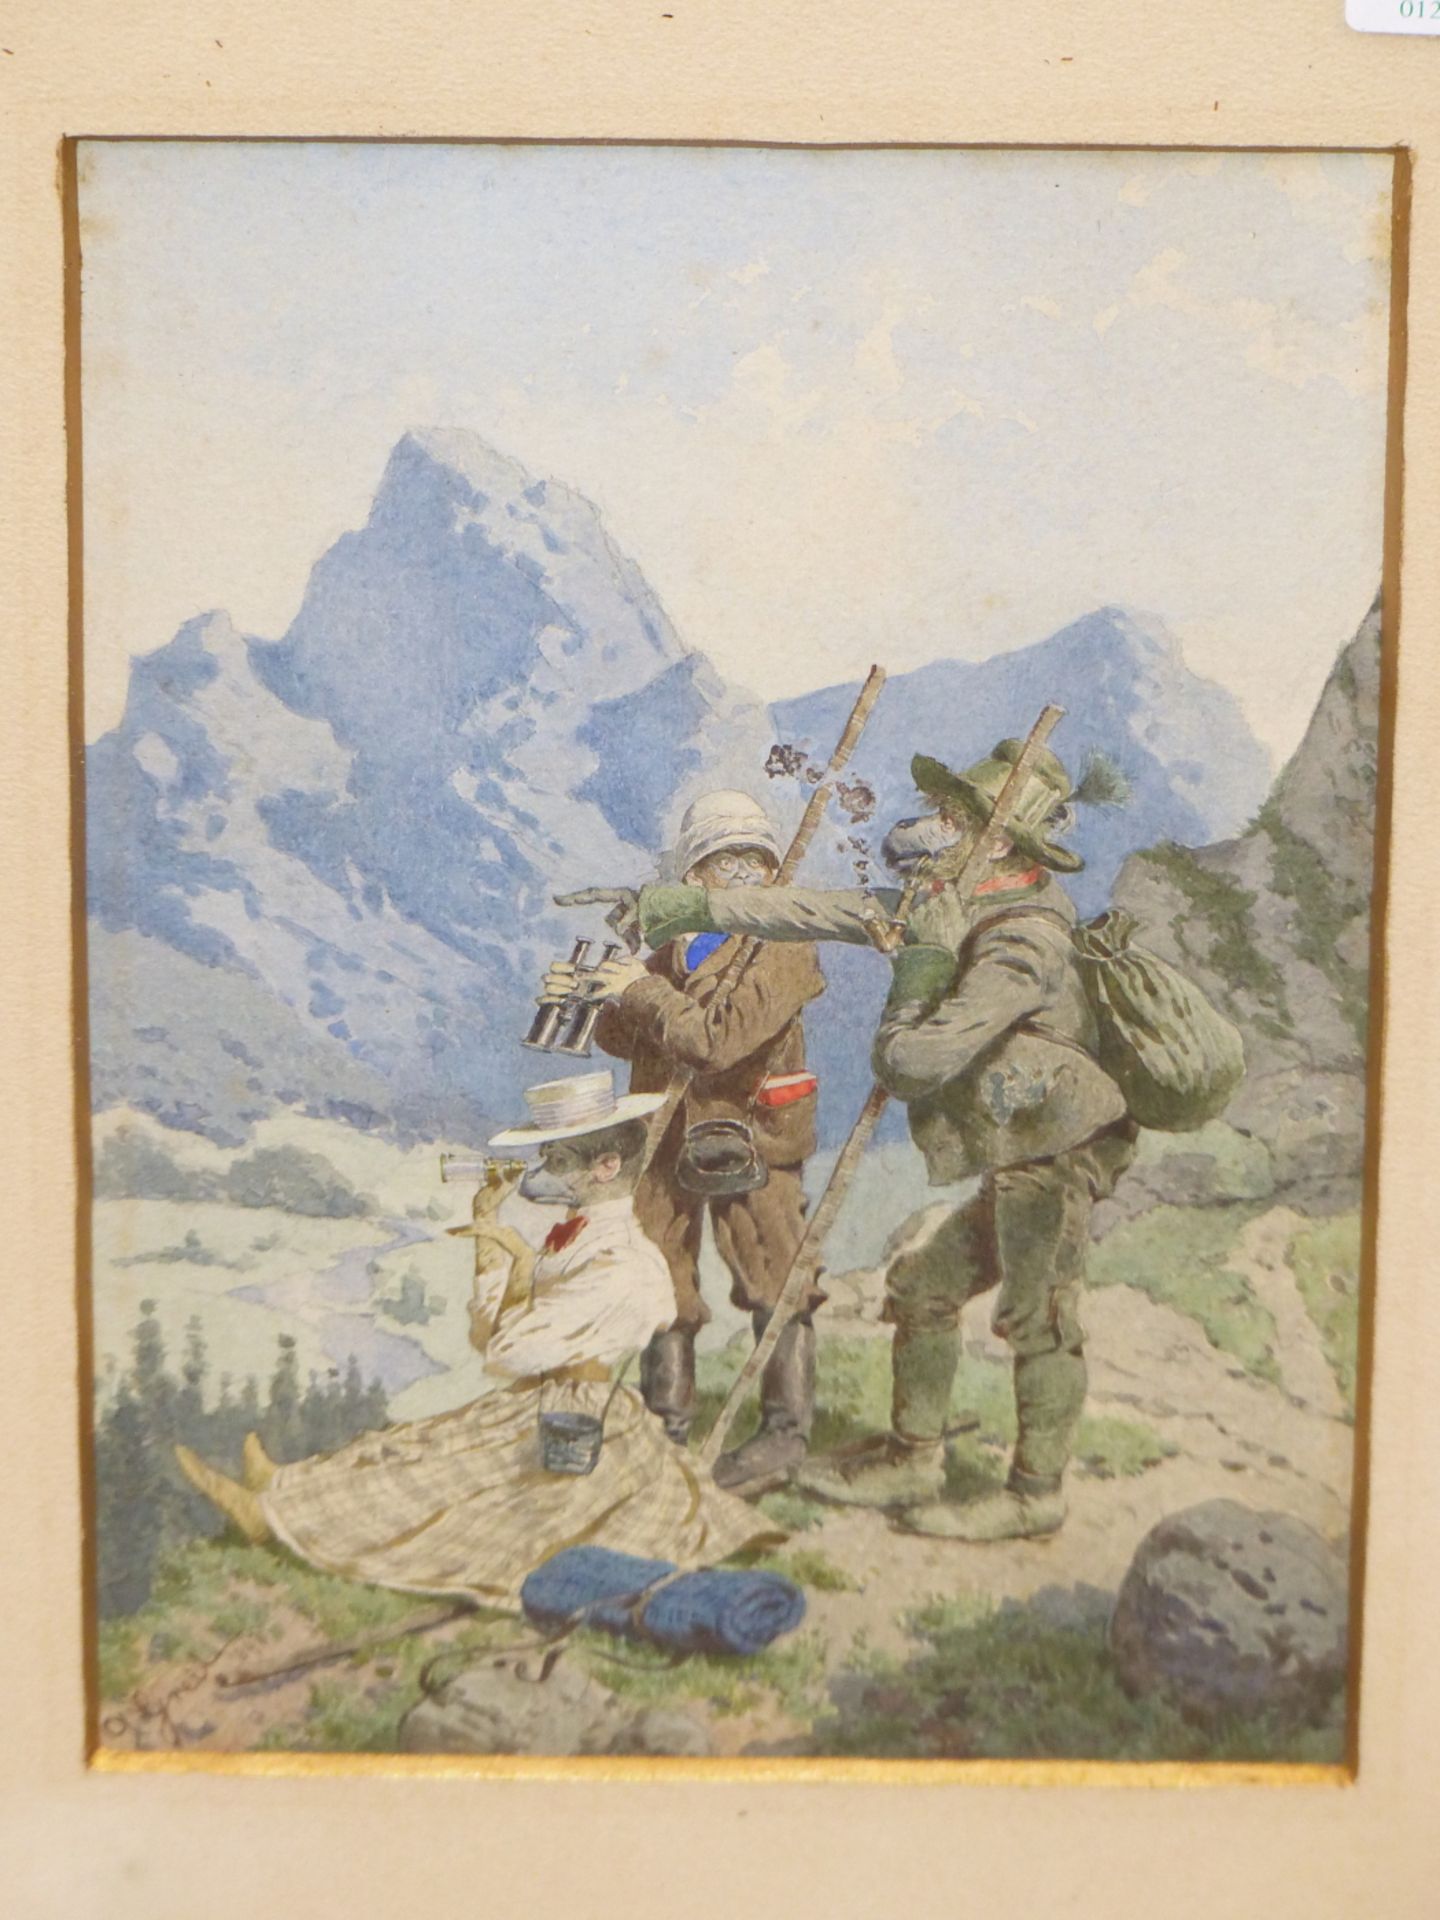 ALOIS GREIL (1842-1902), THREE ANTHROPOMORPHIC CLIMBERS IN THE AUSTRIAN ALPS. WATERCOLOUR, SIGNED - Image 2 of 7